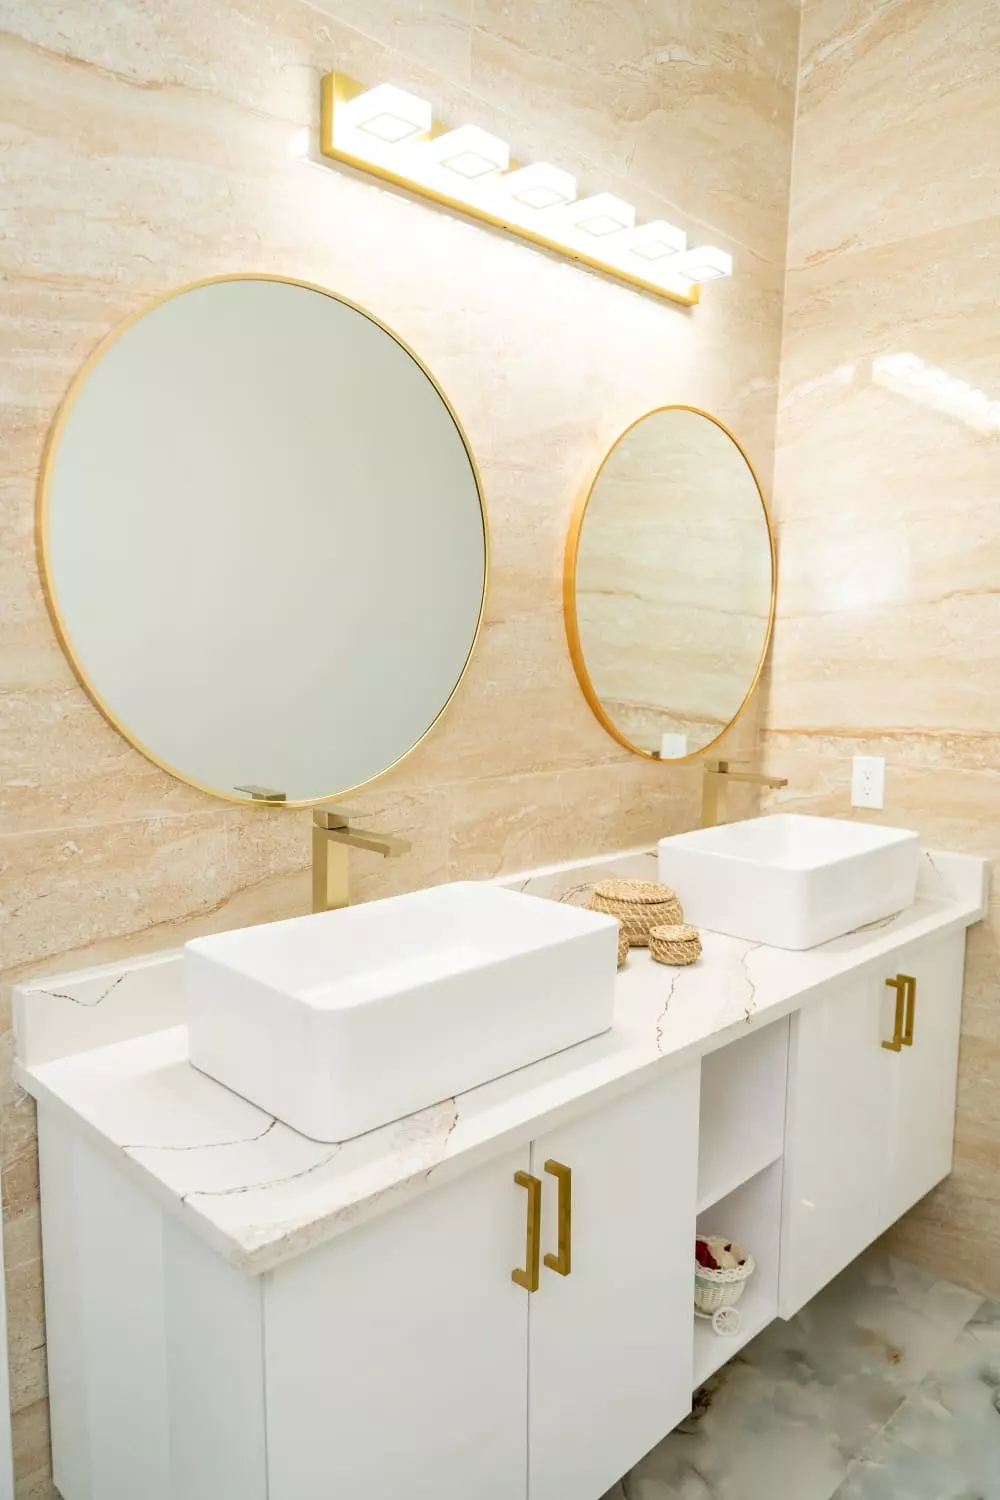 Luxurious bathroom with quartz countertops, top mount porcelain sinks, and polished wall tile